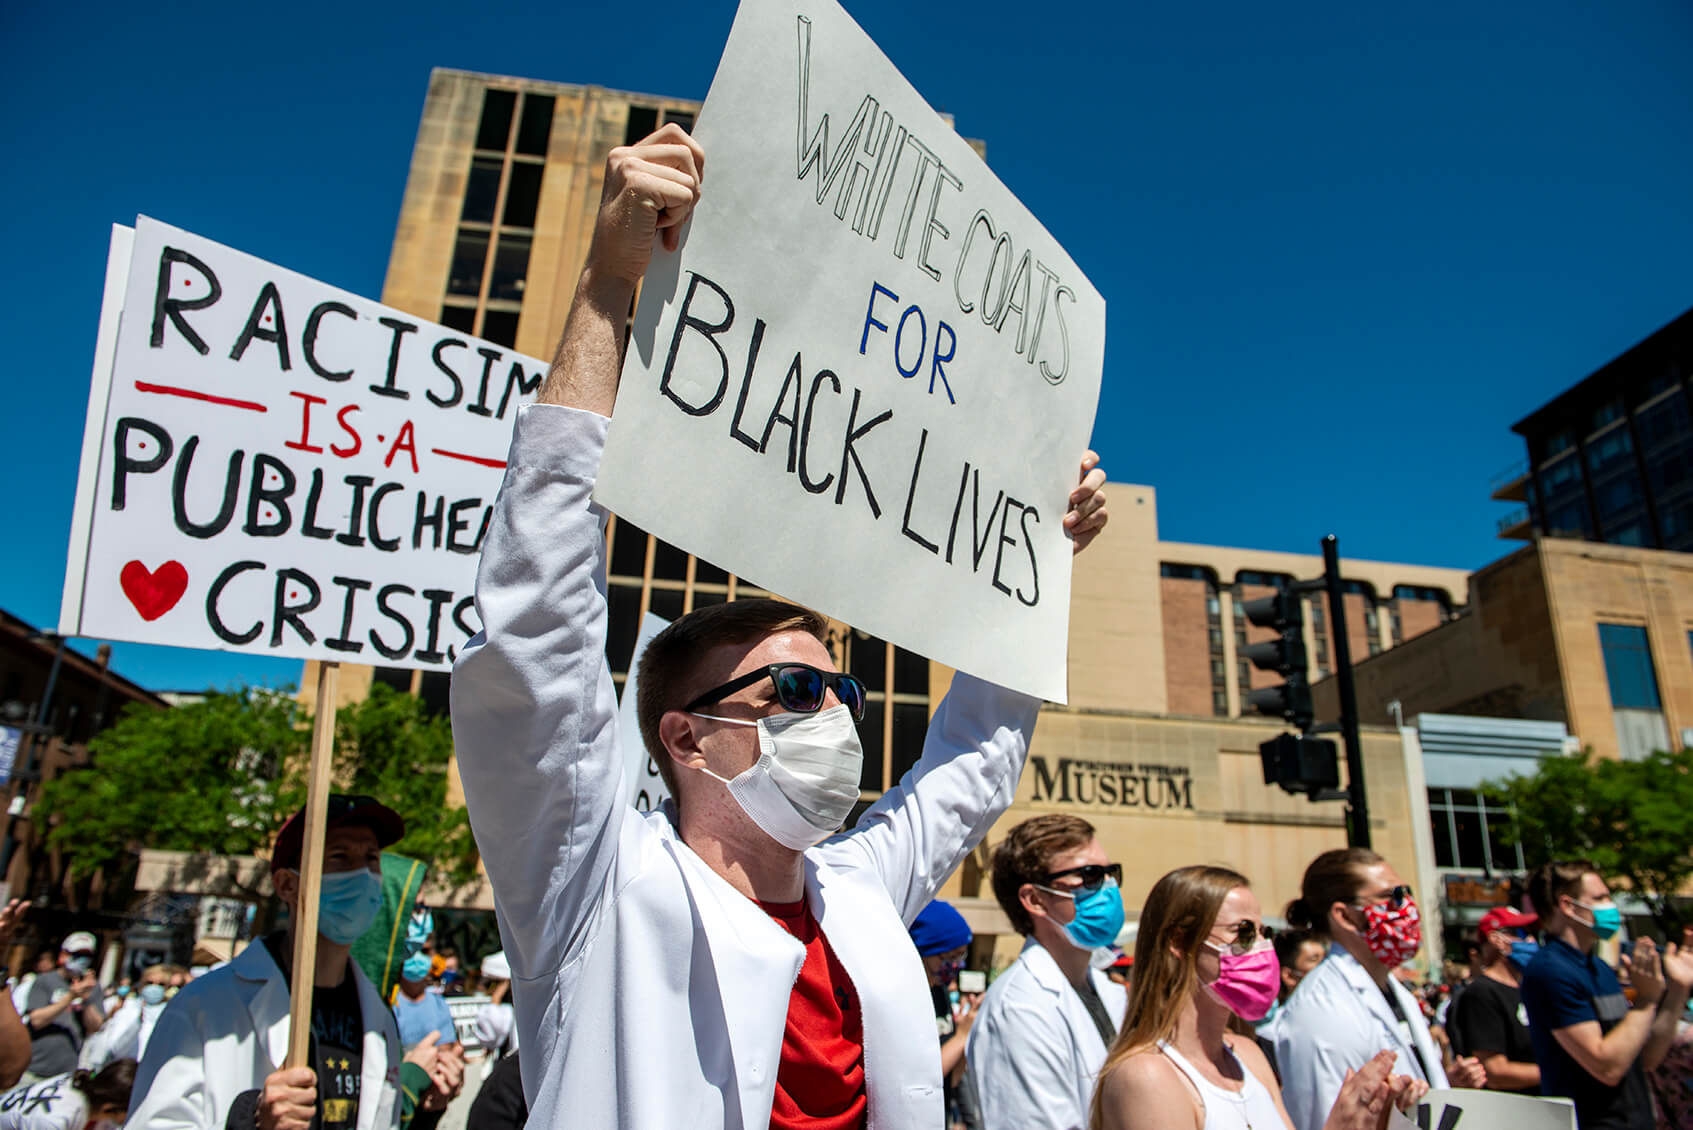 Students during white coats for black lives march